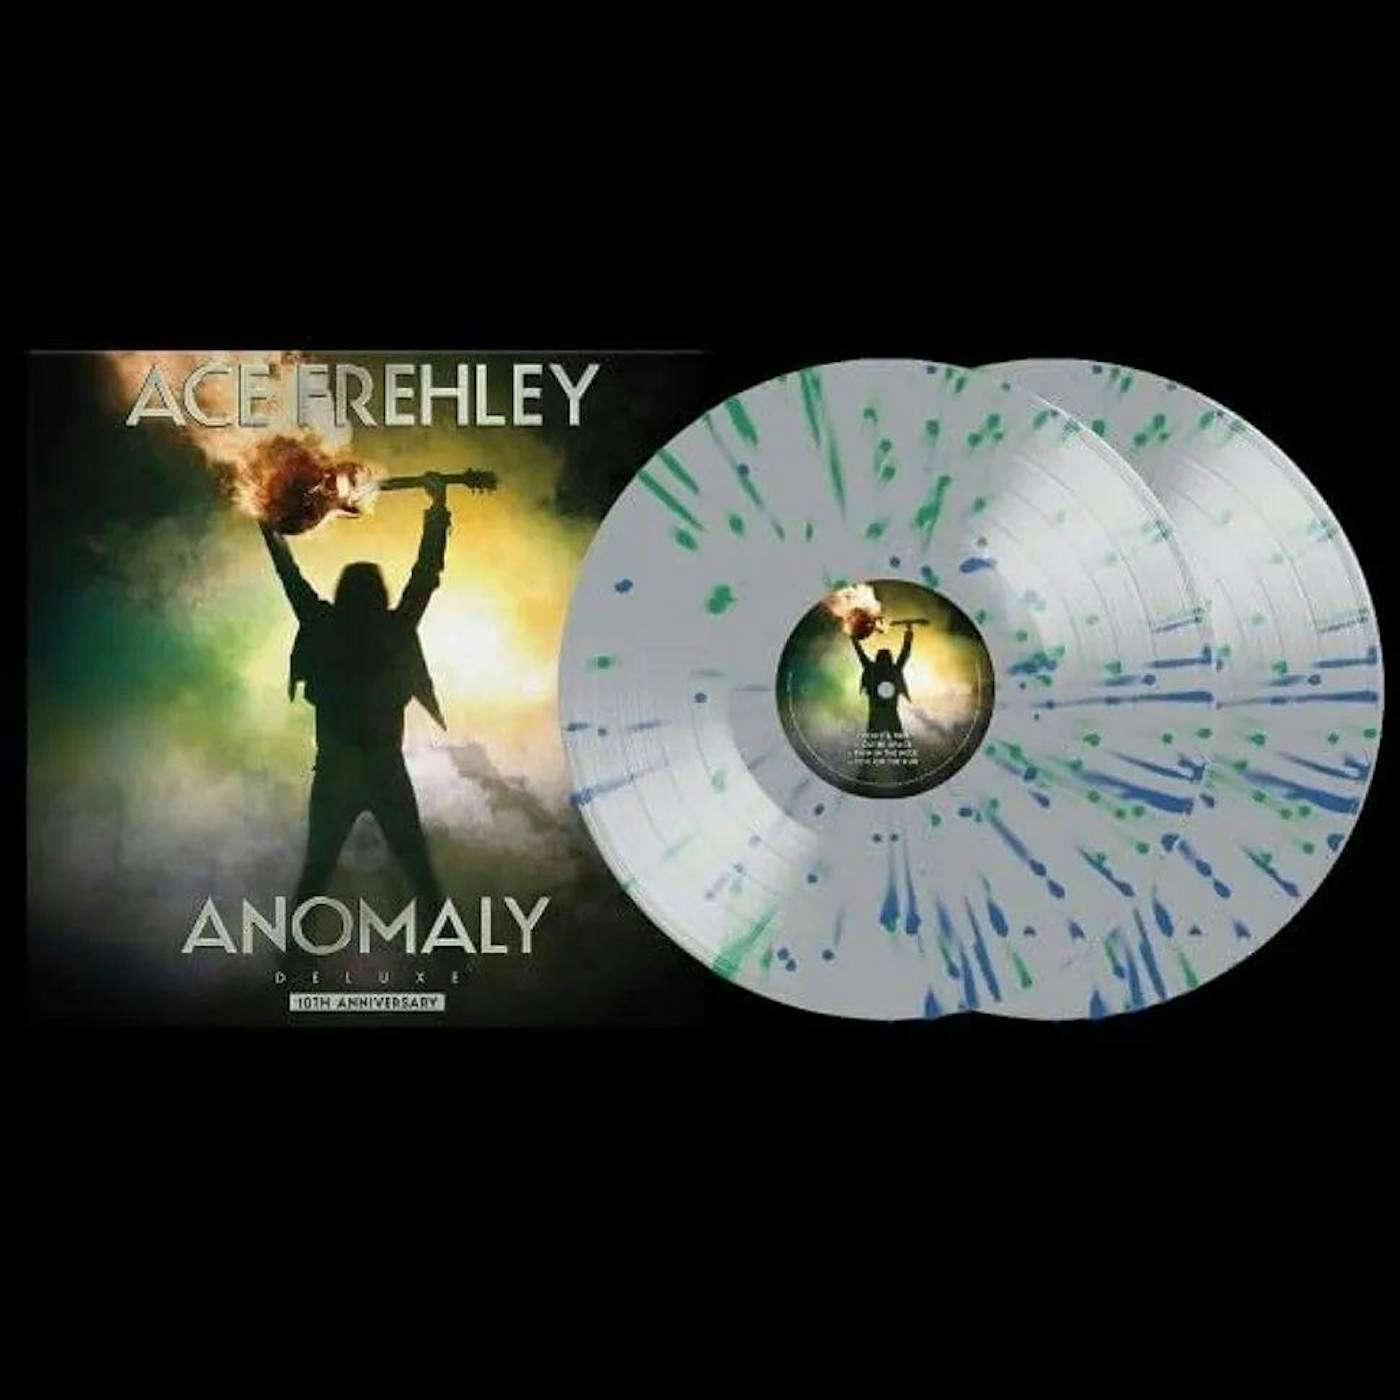 Ace Frehley Anomaly - Deluxe 10th Anniversary (Silver/Bluejay/Emerald Splatter) Vinyl Record